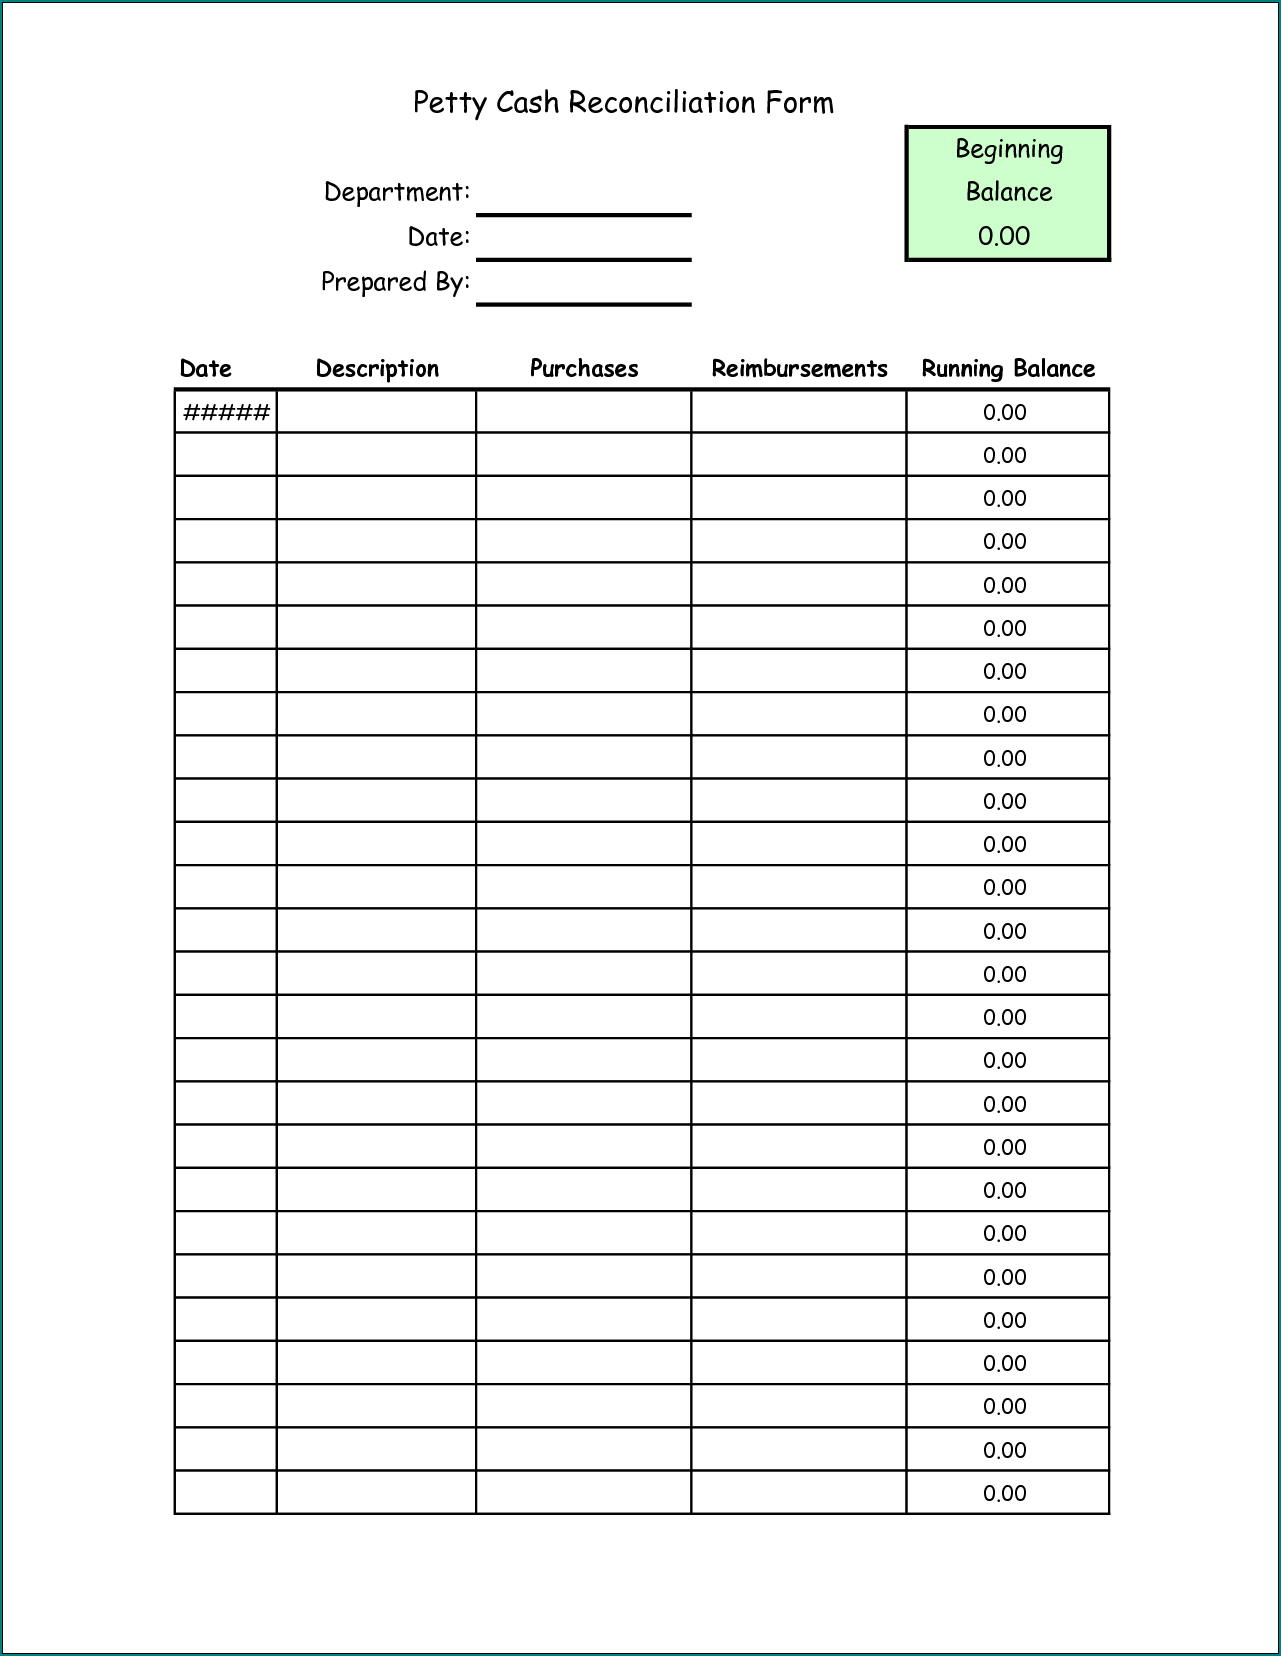 Example of Petty Cash Reconciliation Form